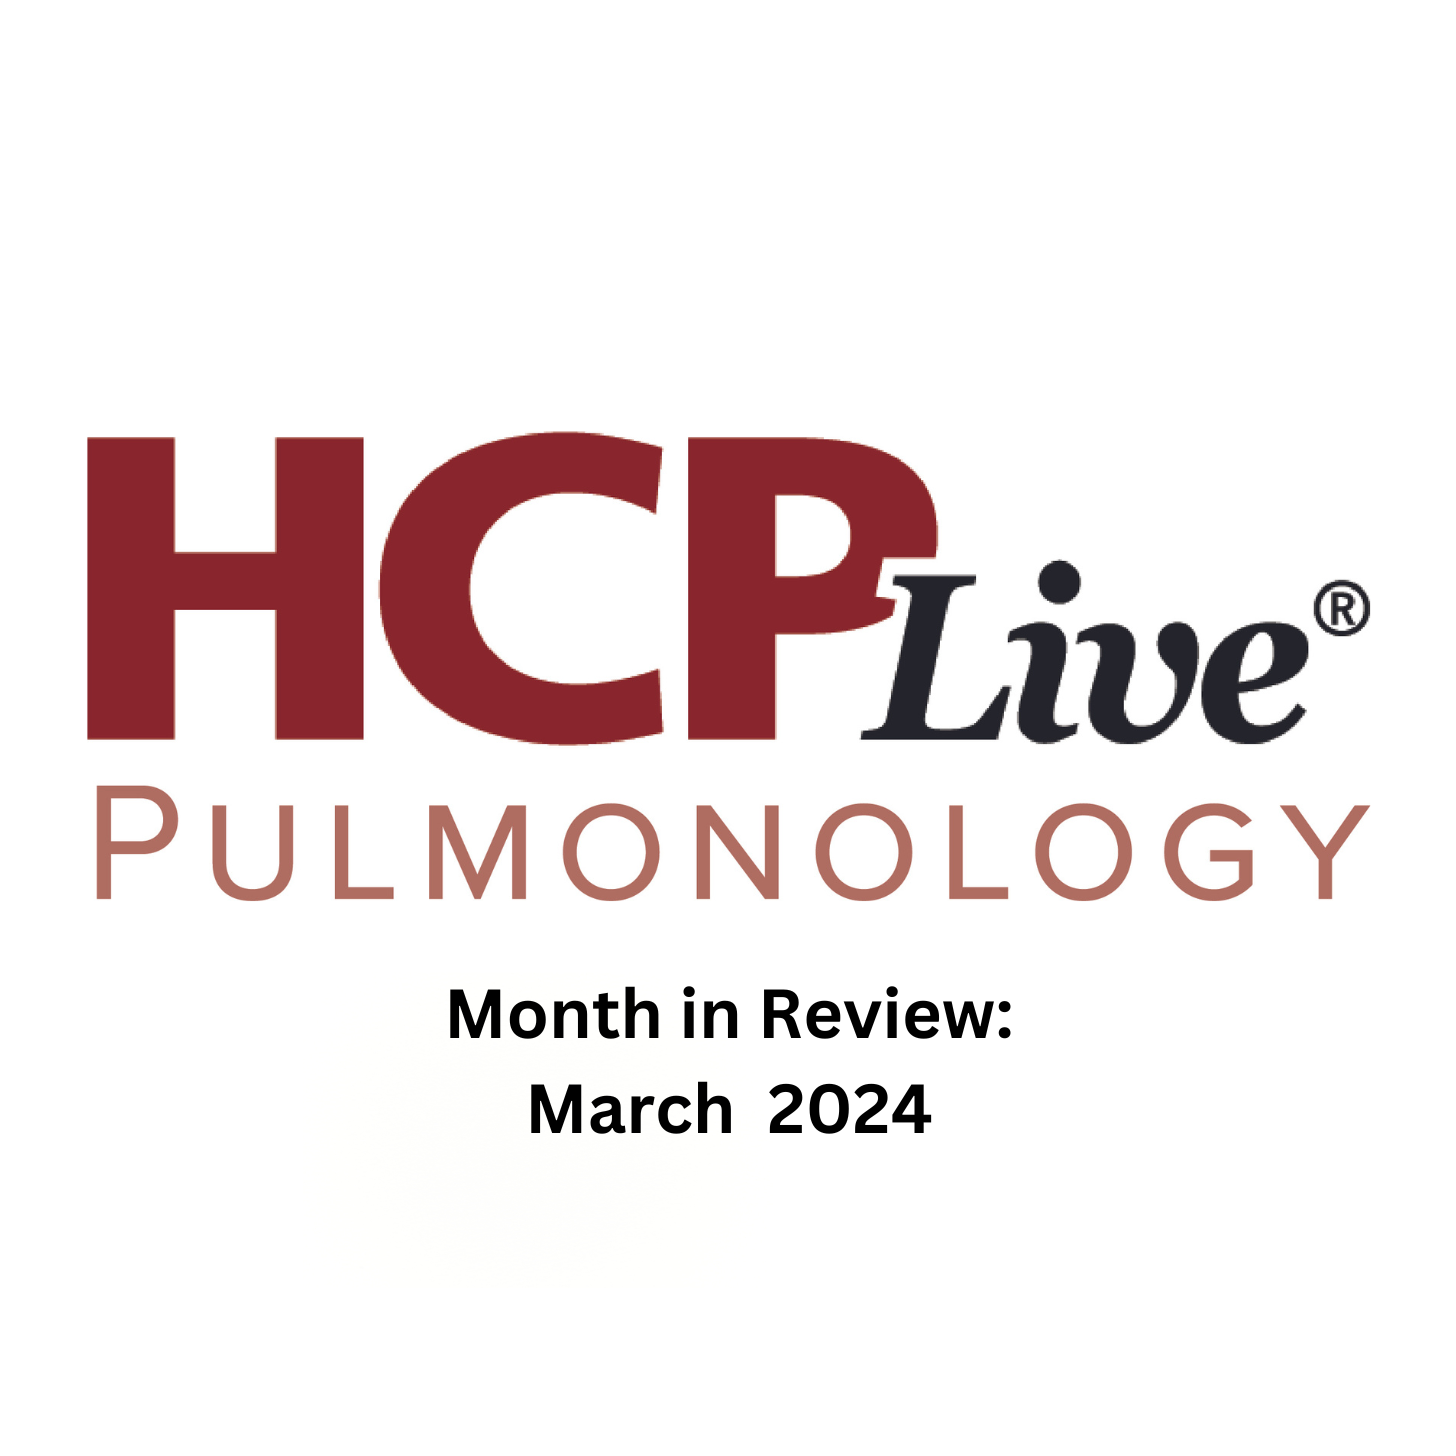 Pulmonology Month in Review: March 2024